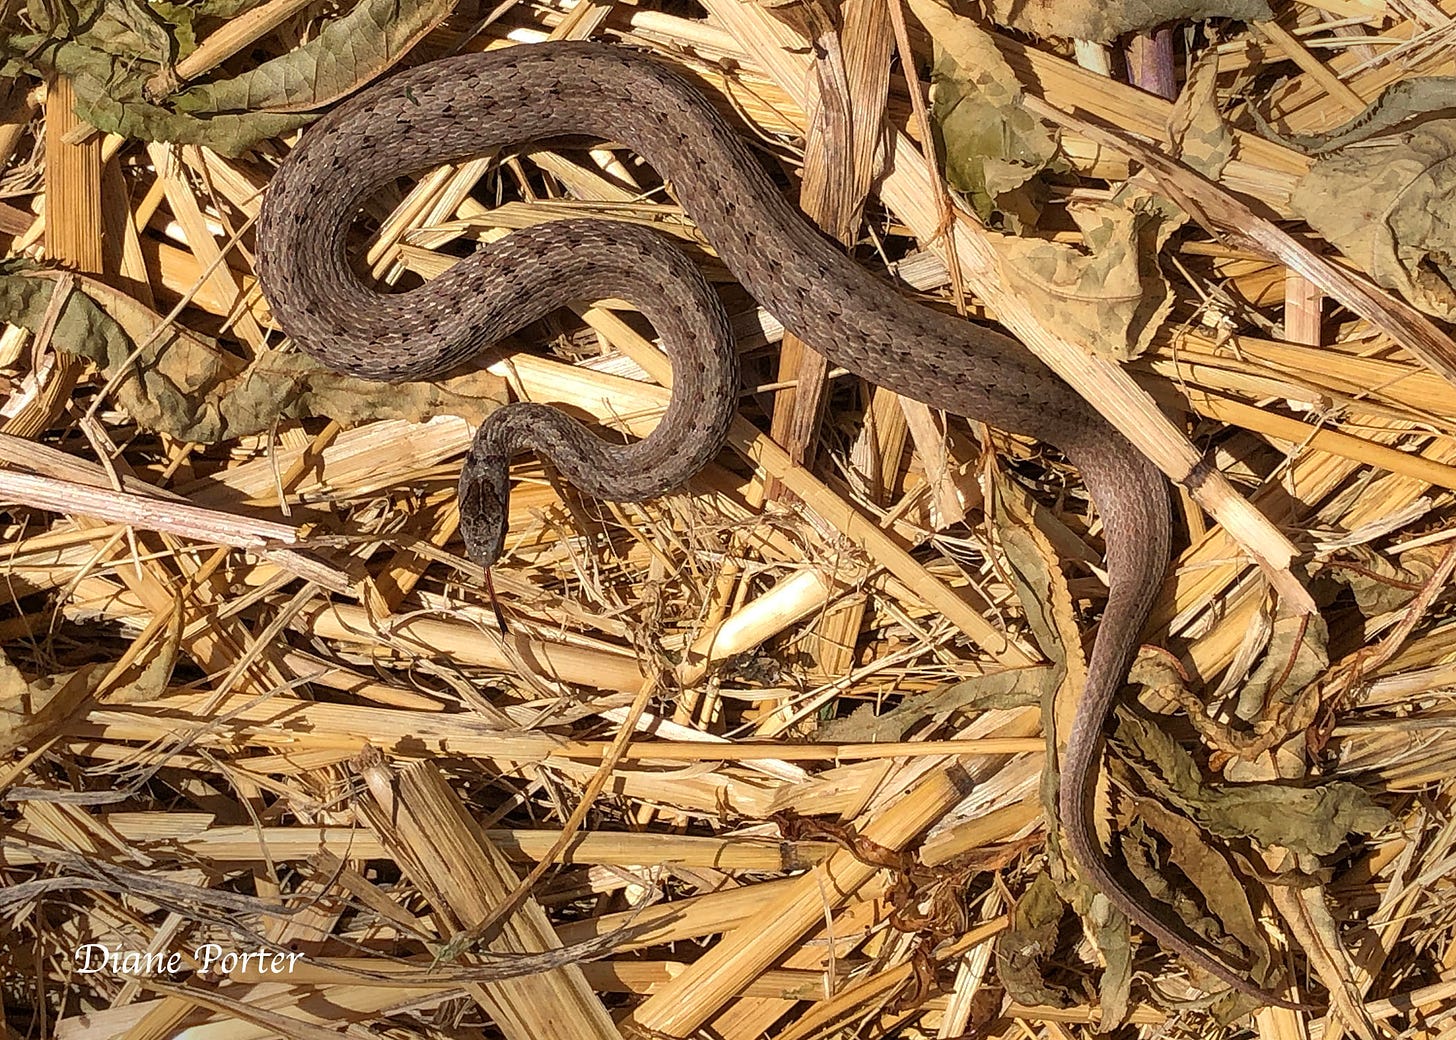 DeKay's Brownsnake is a tiny, non-venomous native snake that is native to eastern North America.